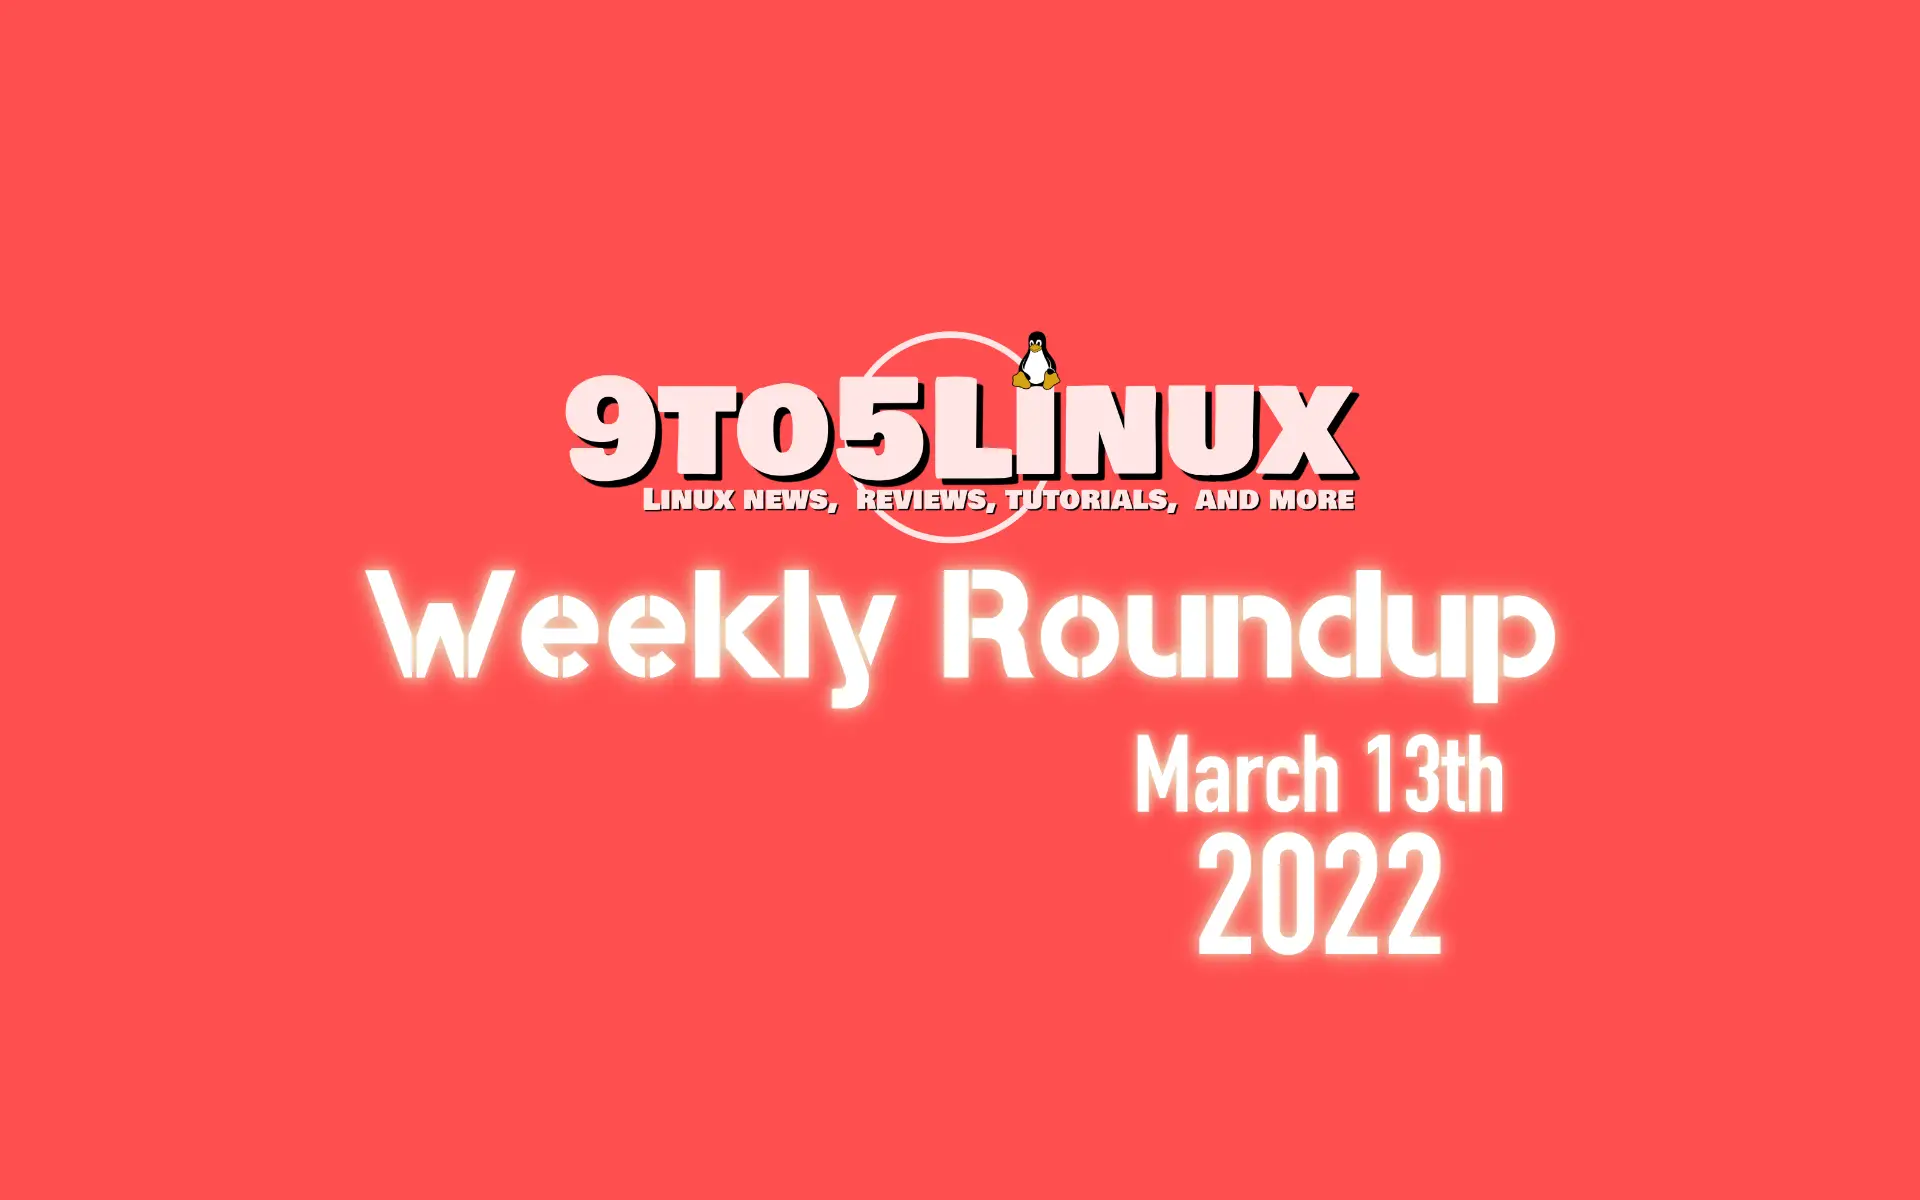 9to5Linux Weekly Roundup: March 13th, 2022